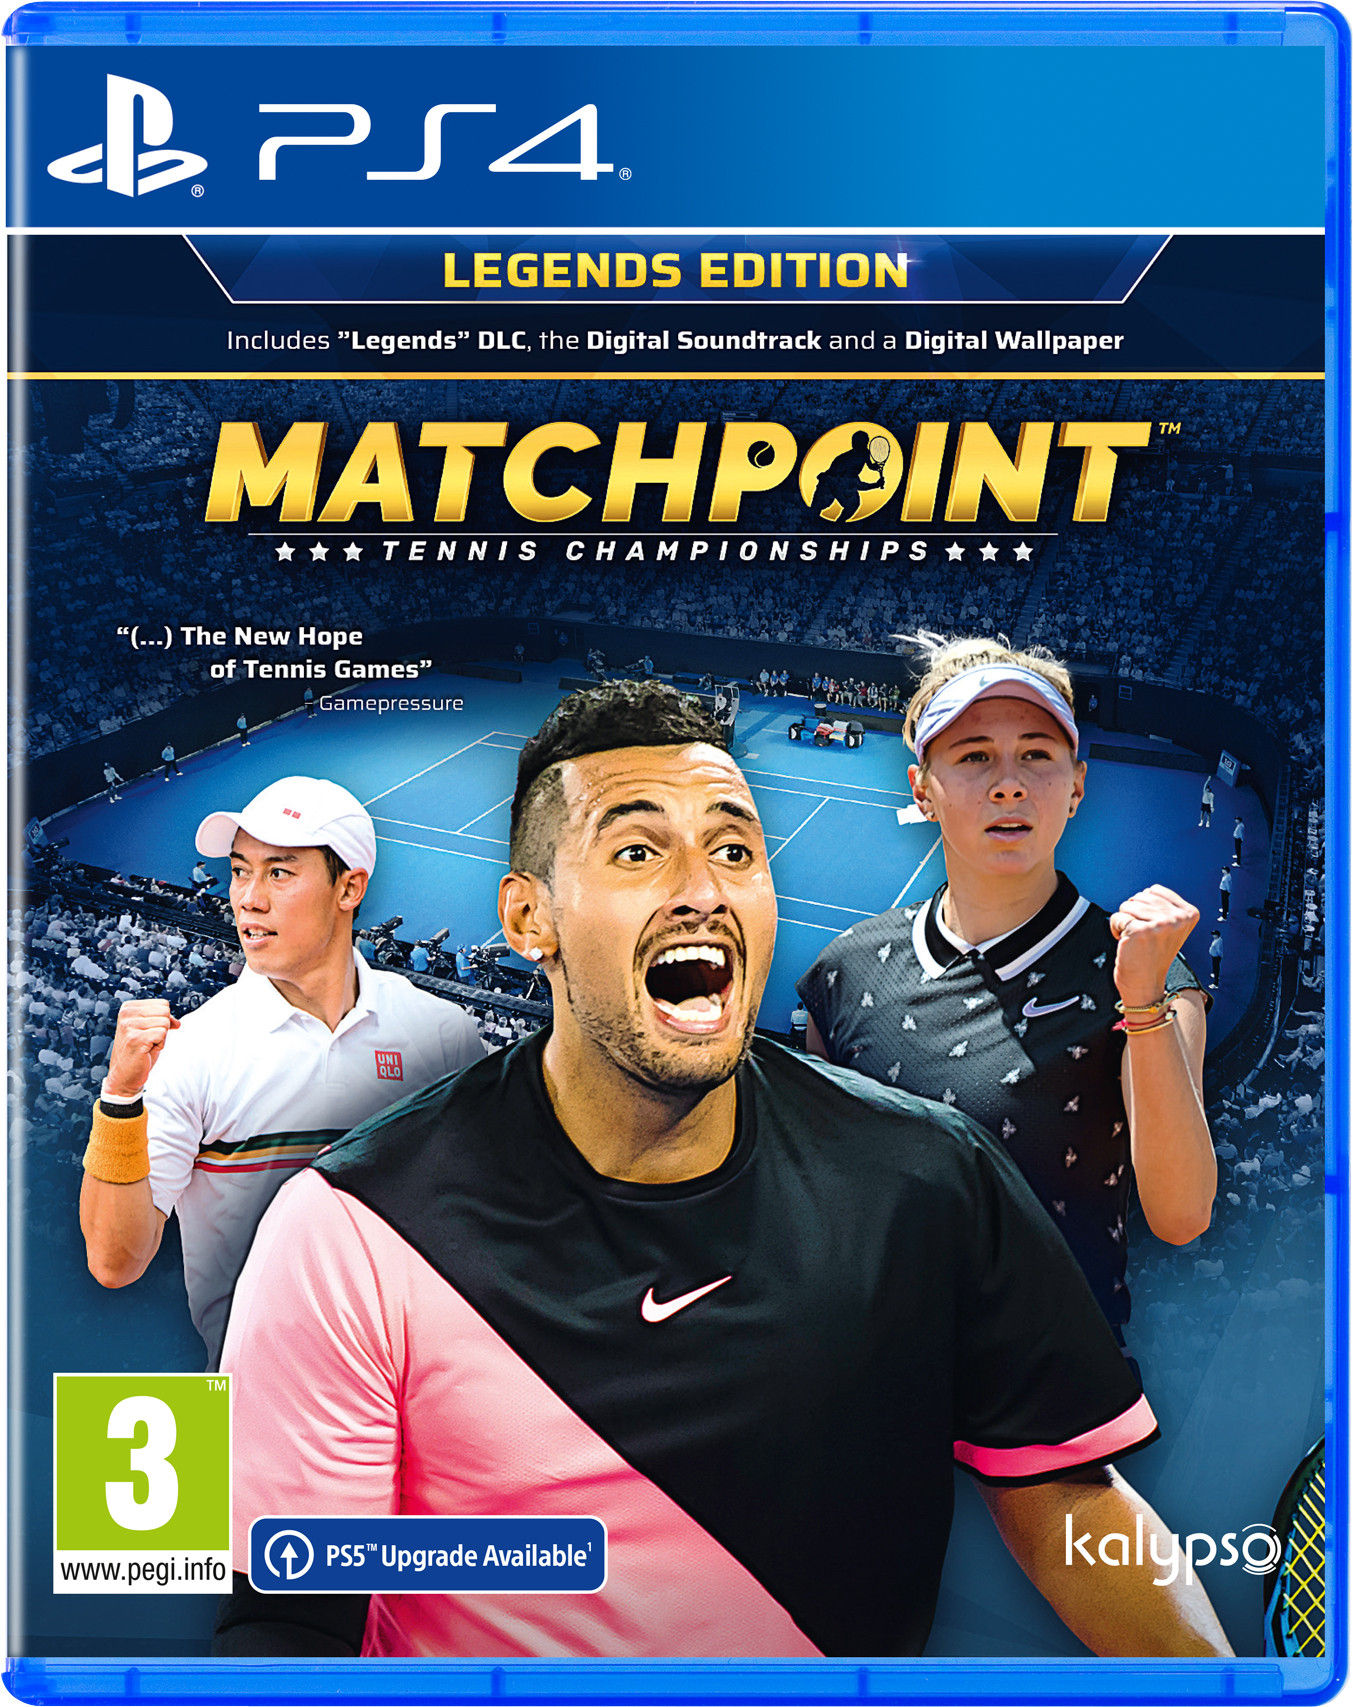 Matchpoint - Tennis Championships Legends Edition PlayStation 4